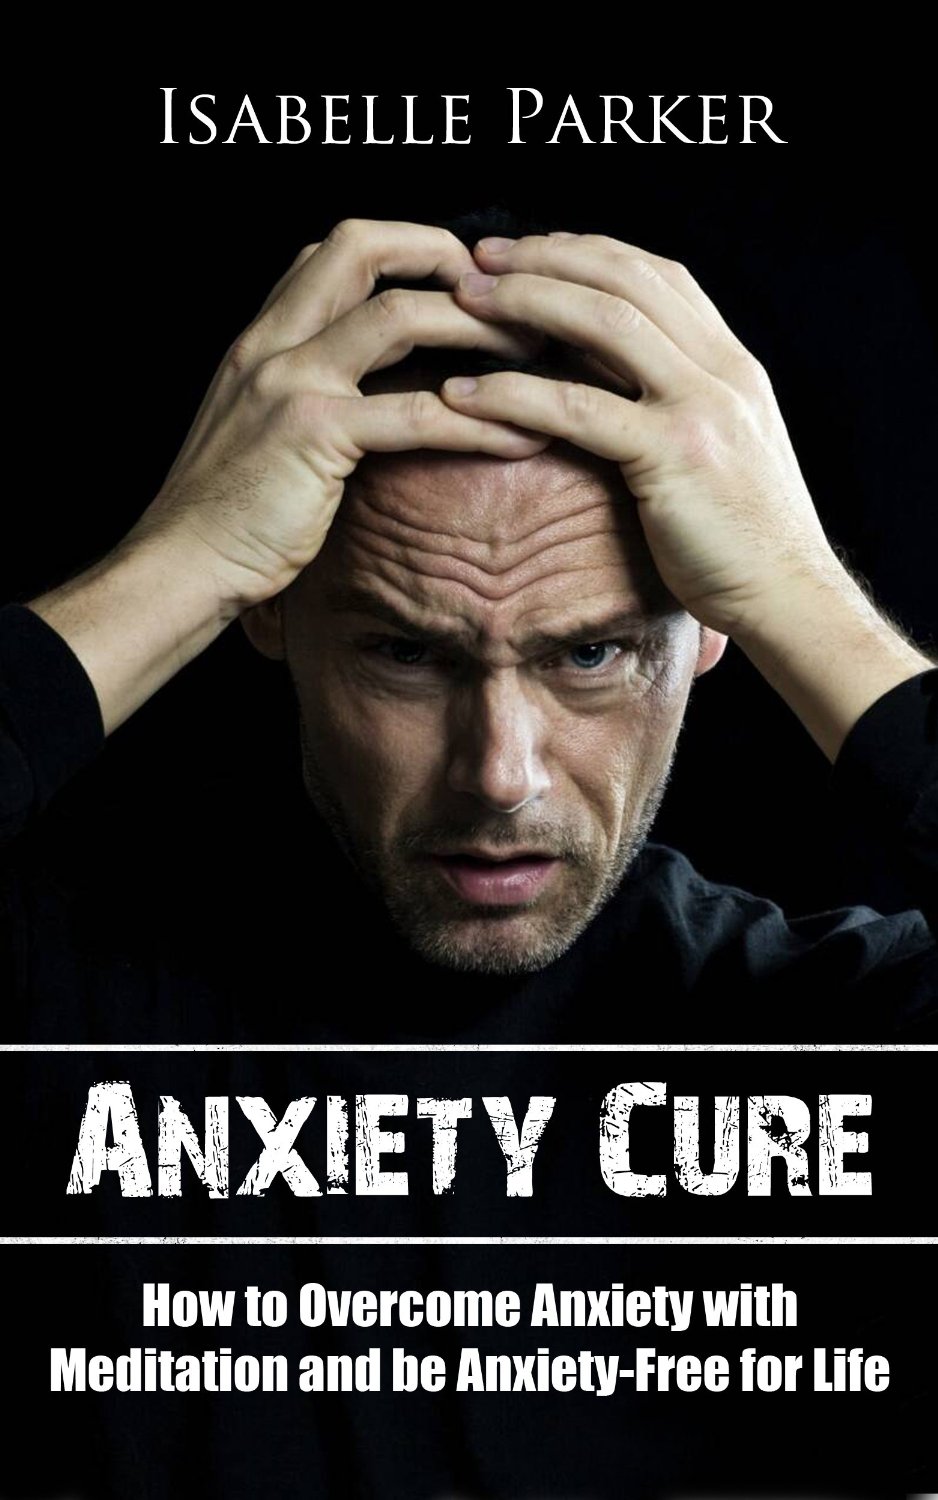 Anxiety Cure by Isabelle Parker